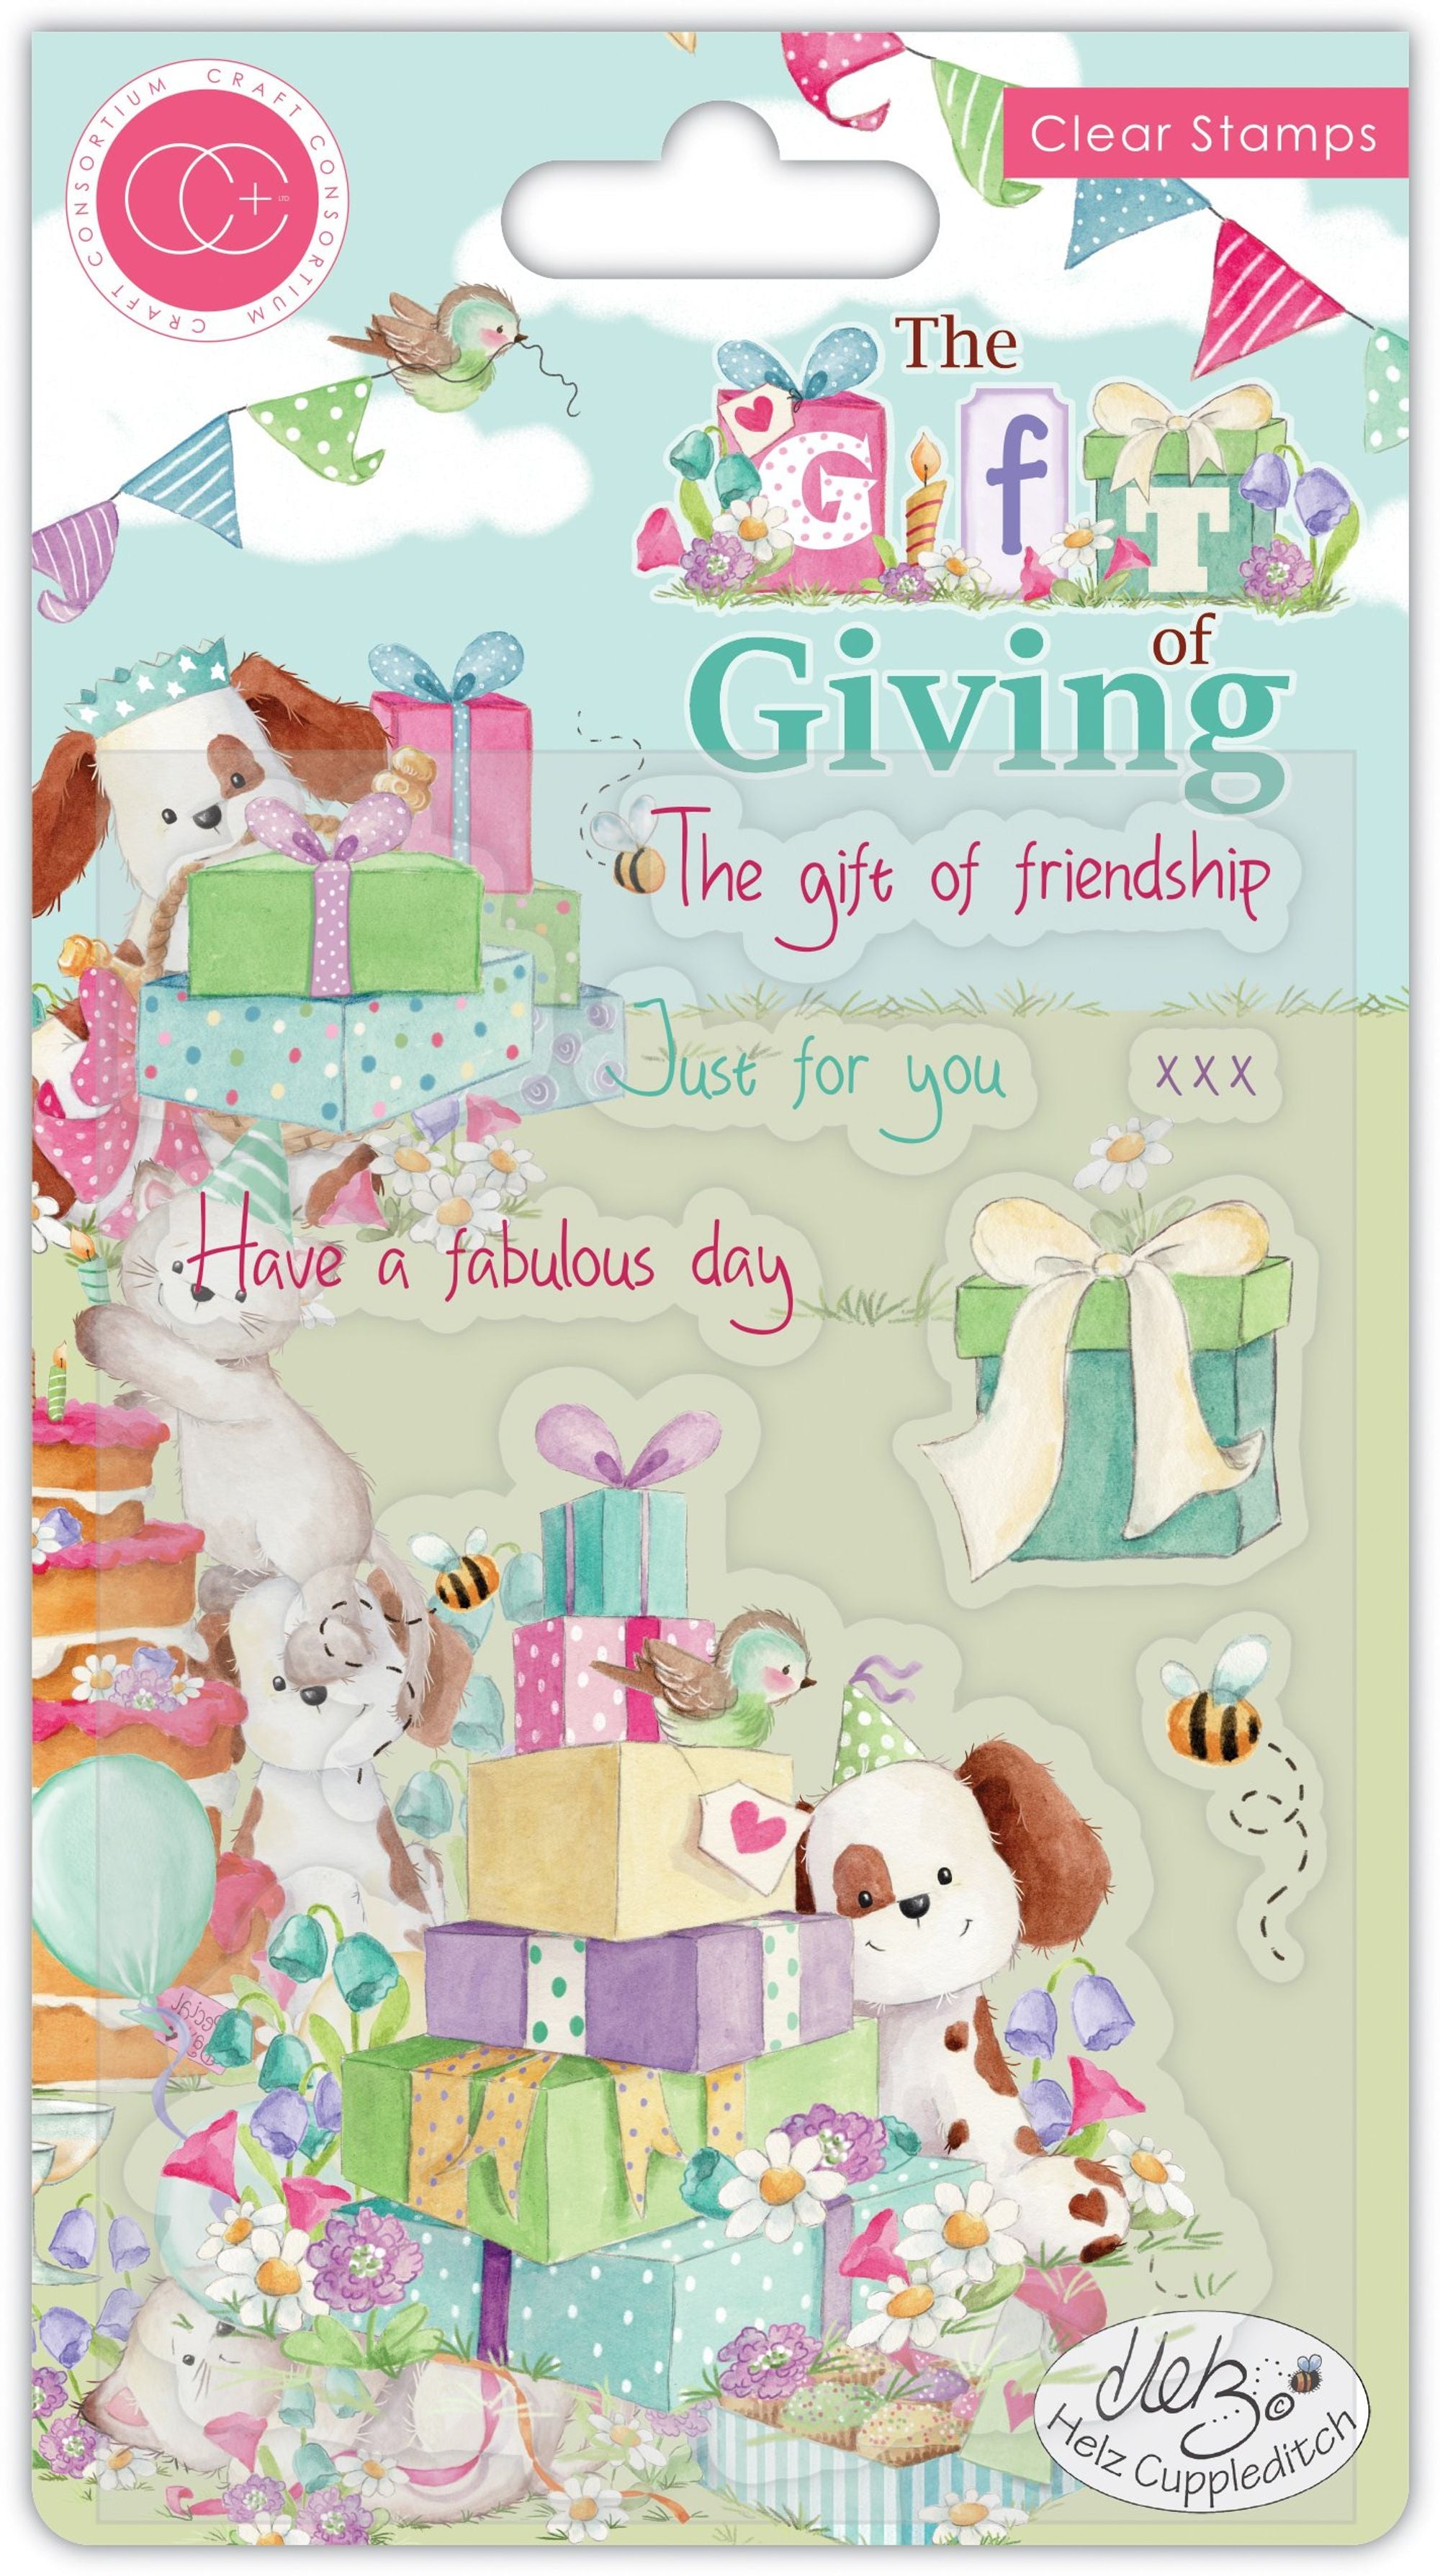 The Gift of Giving Stamp Set - The Gift